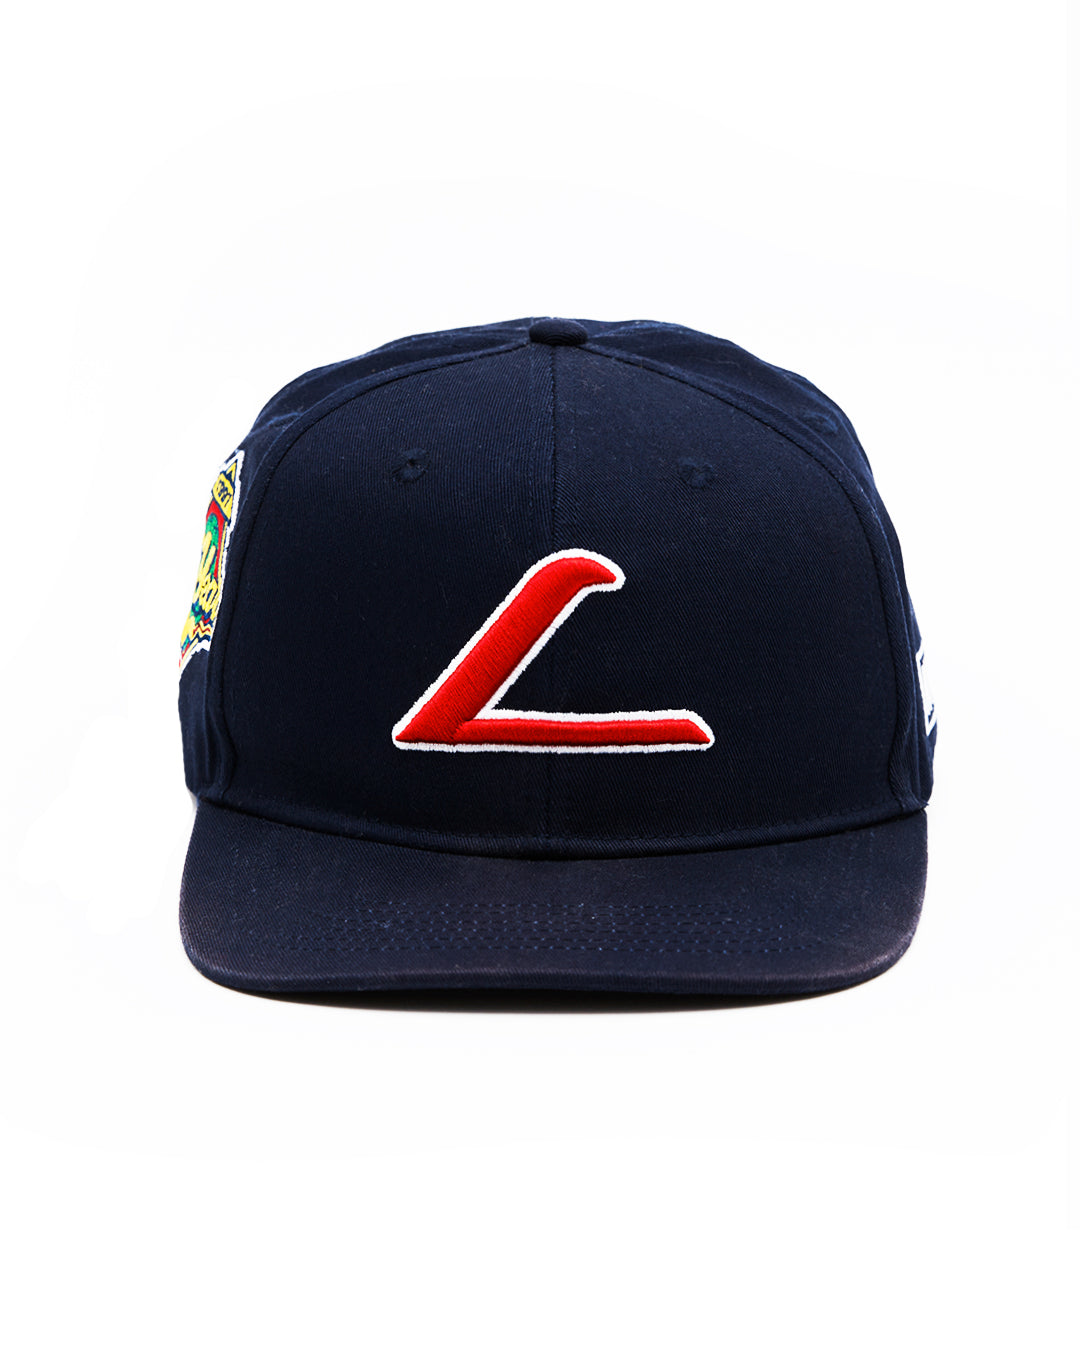 Official Pokémon League Expo Hat - 25 Year Anniversary Edition